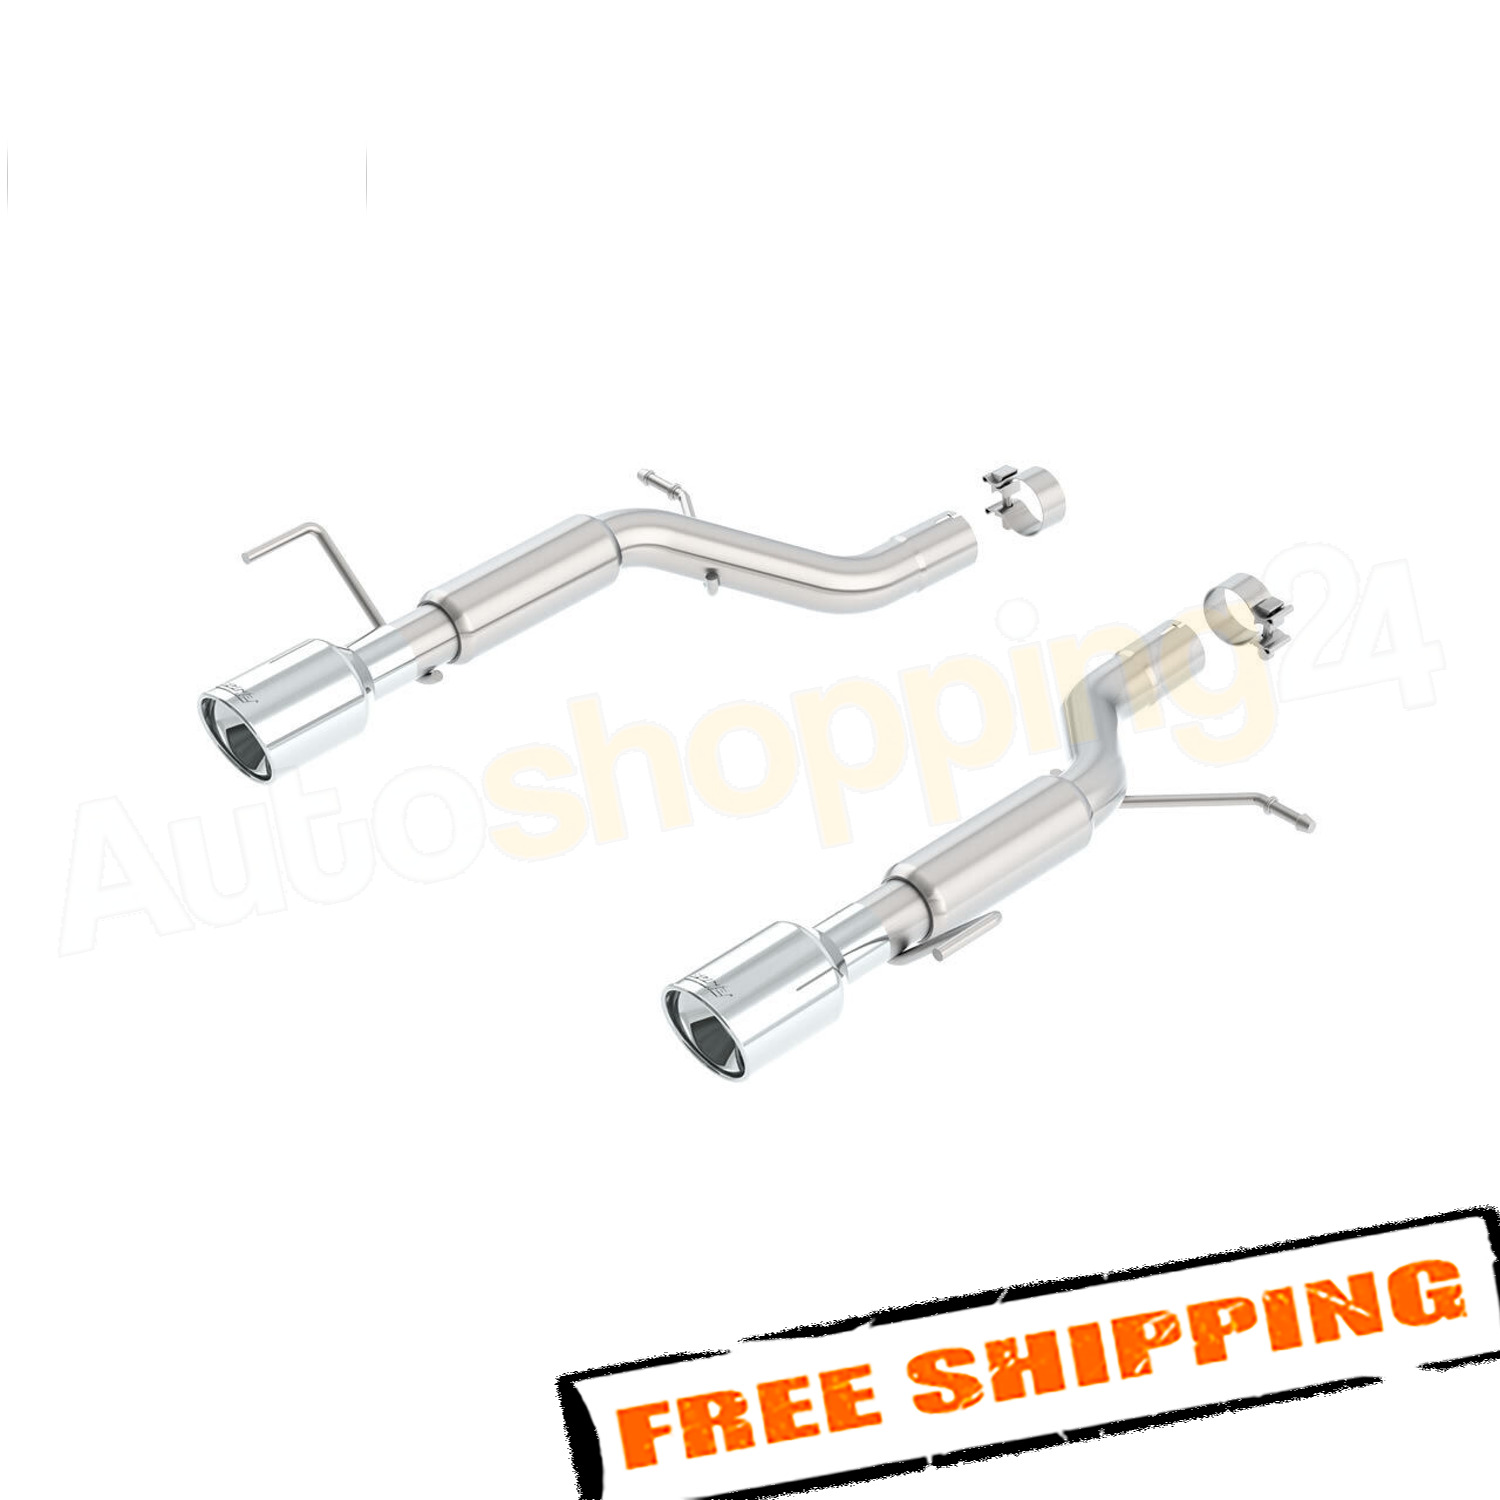 Borla 11844 S-Type Exhaust for 2013-2015 Cadillac ATS 2.0L 4 Cyl.